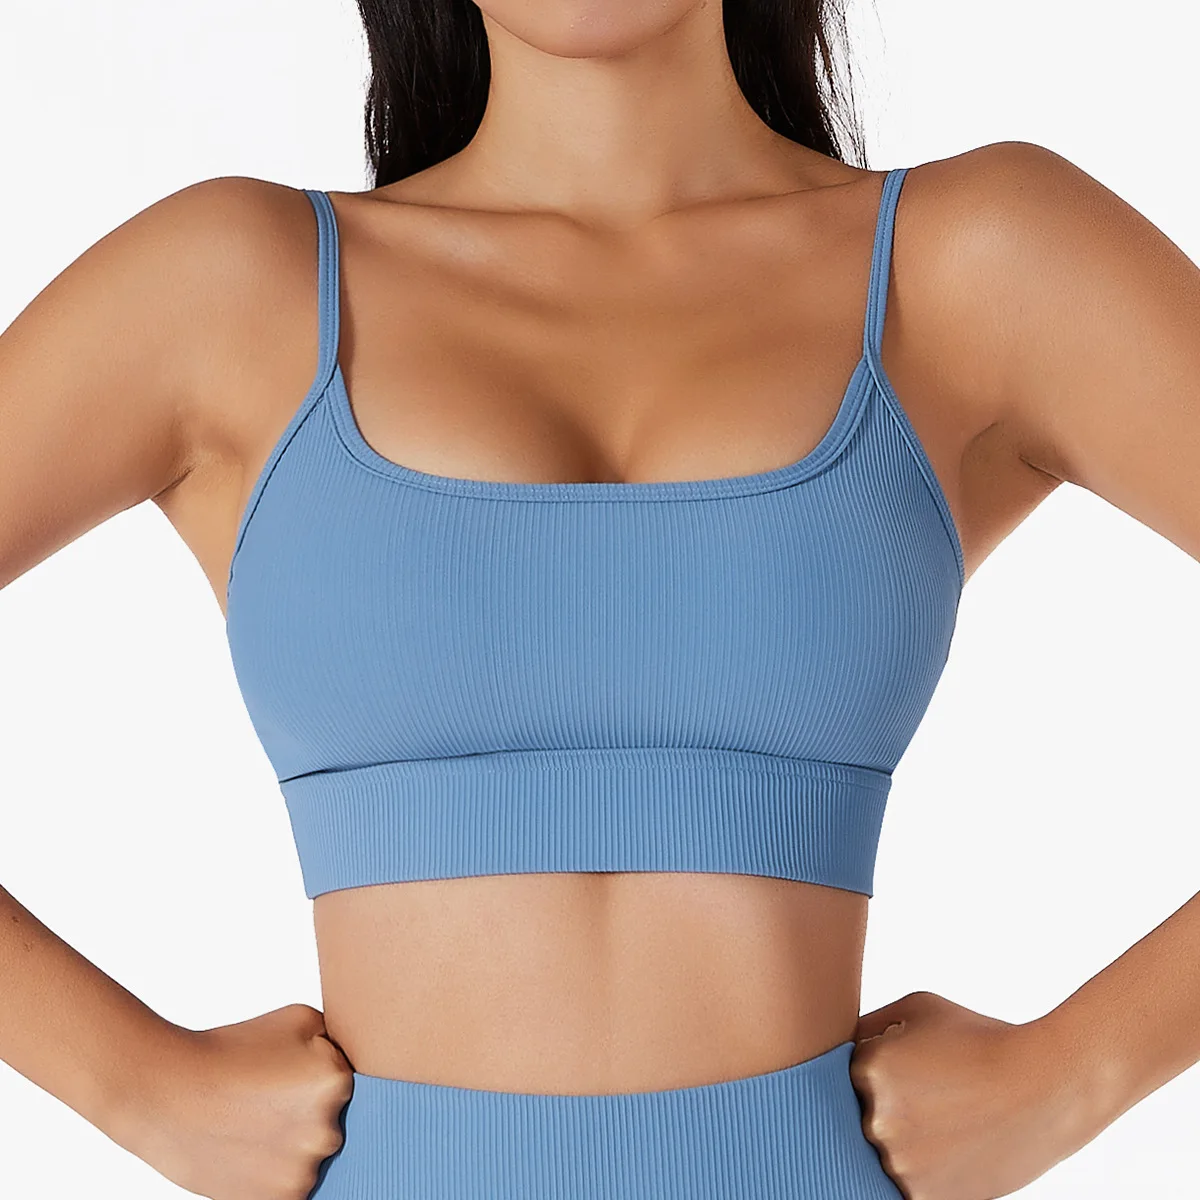 HIGH QUALITY trend workout padded tops womens beauty back yoga gym activewear strappy sports bra WOMEN